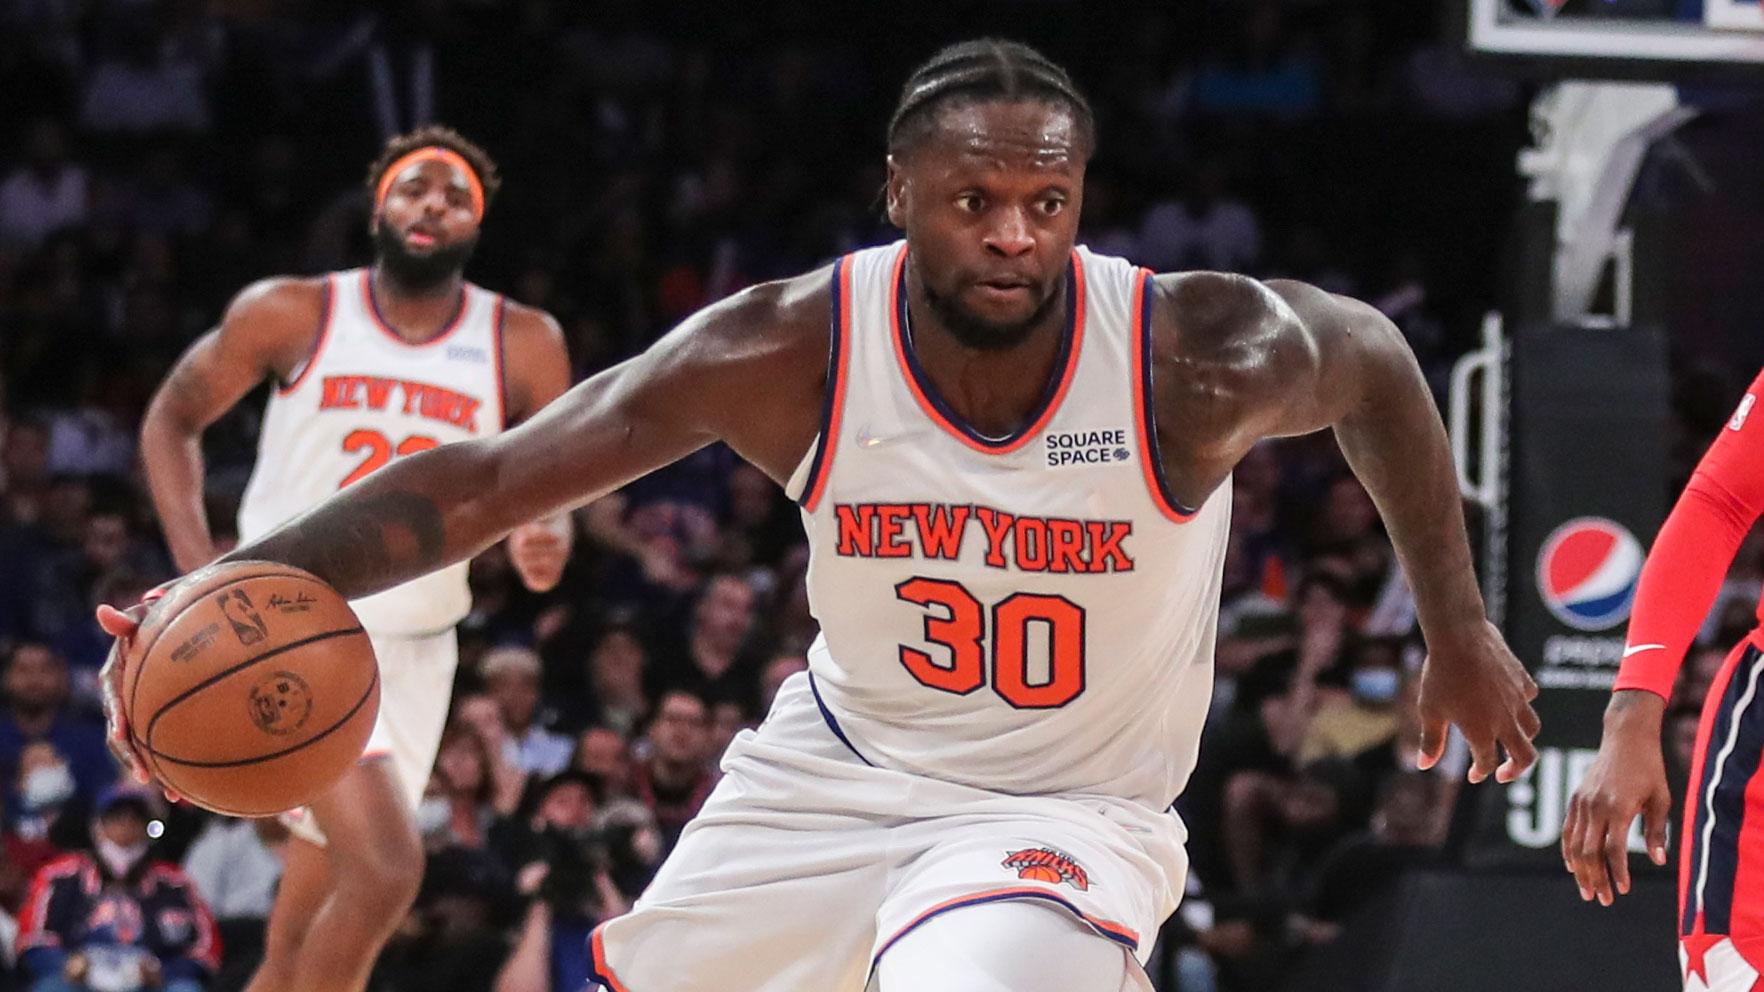 Oct 15, 2021; New York, New York, USA; New York Knicks forward Julius Randle (30) drives to the basket against the Washington Wizards in the third quarter at Madison Square Garden. / Wendell Cruz-USA TODAY Sports